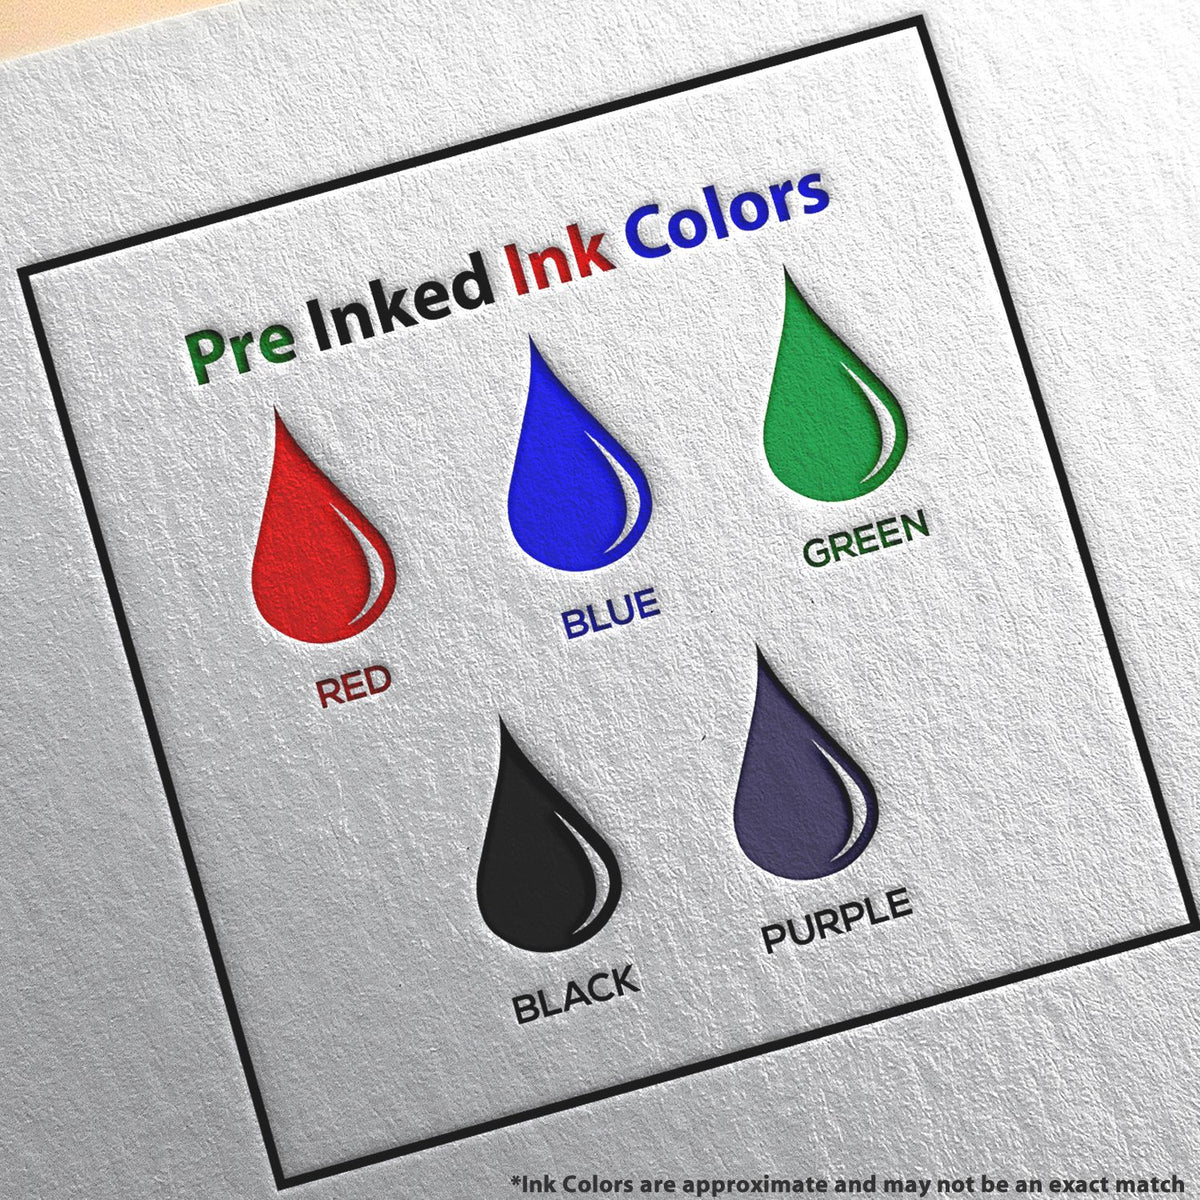 A picture showing the different ink colors or hues available for the MaxLight Premium Pre-Inked Guam Rectangular Notarial Stamp product.